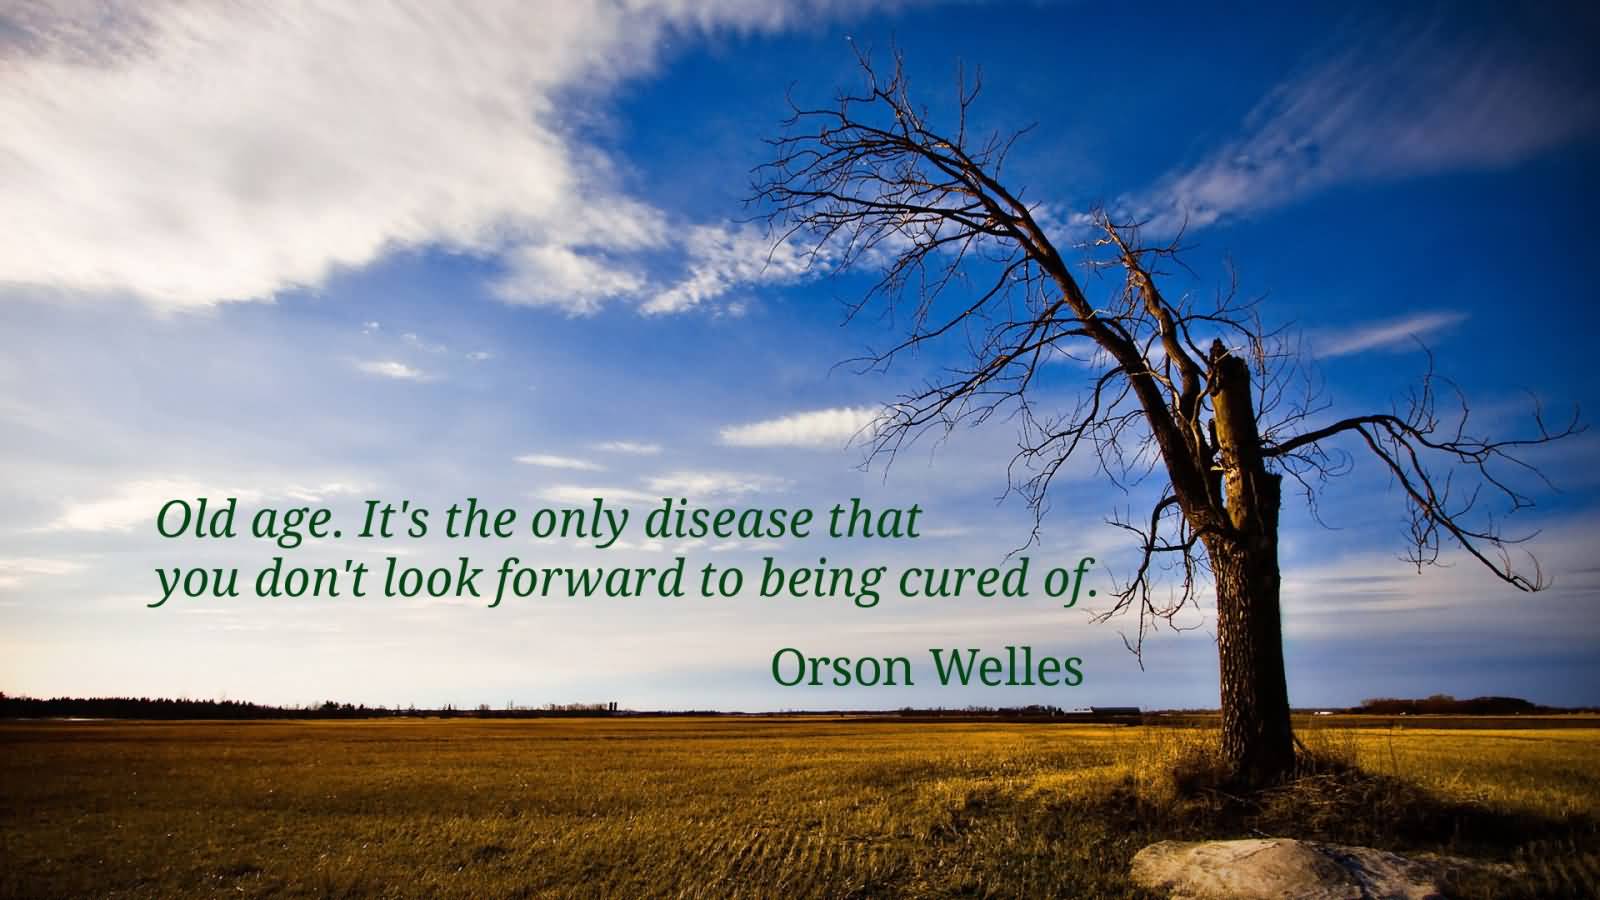 Old age. It’s the only disease that you don’t look forward to being cured of. Orson Welles